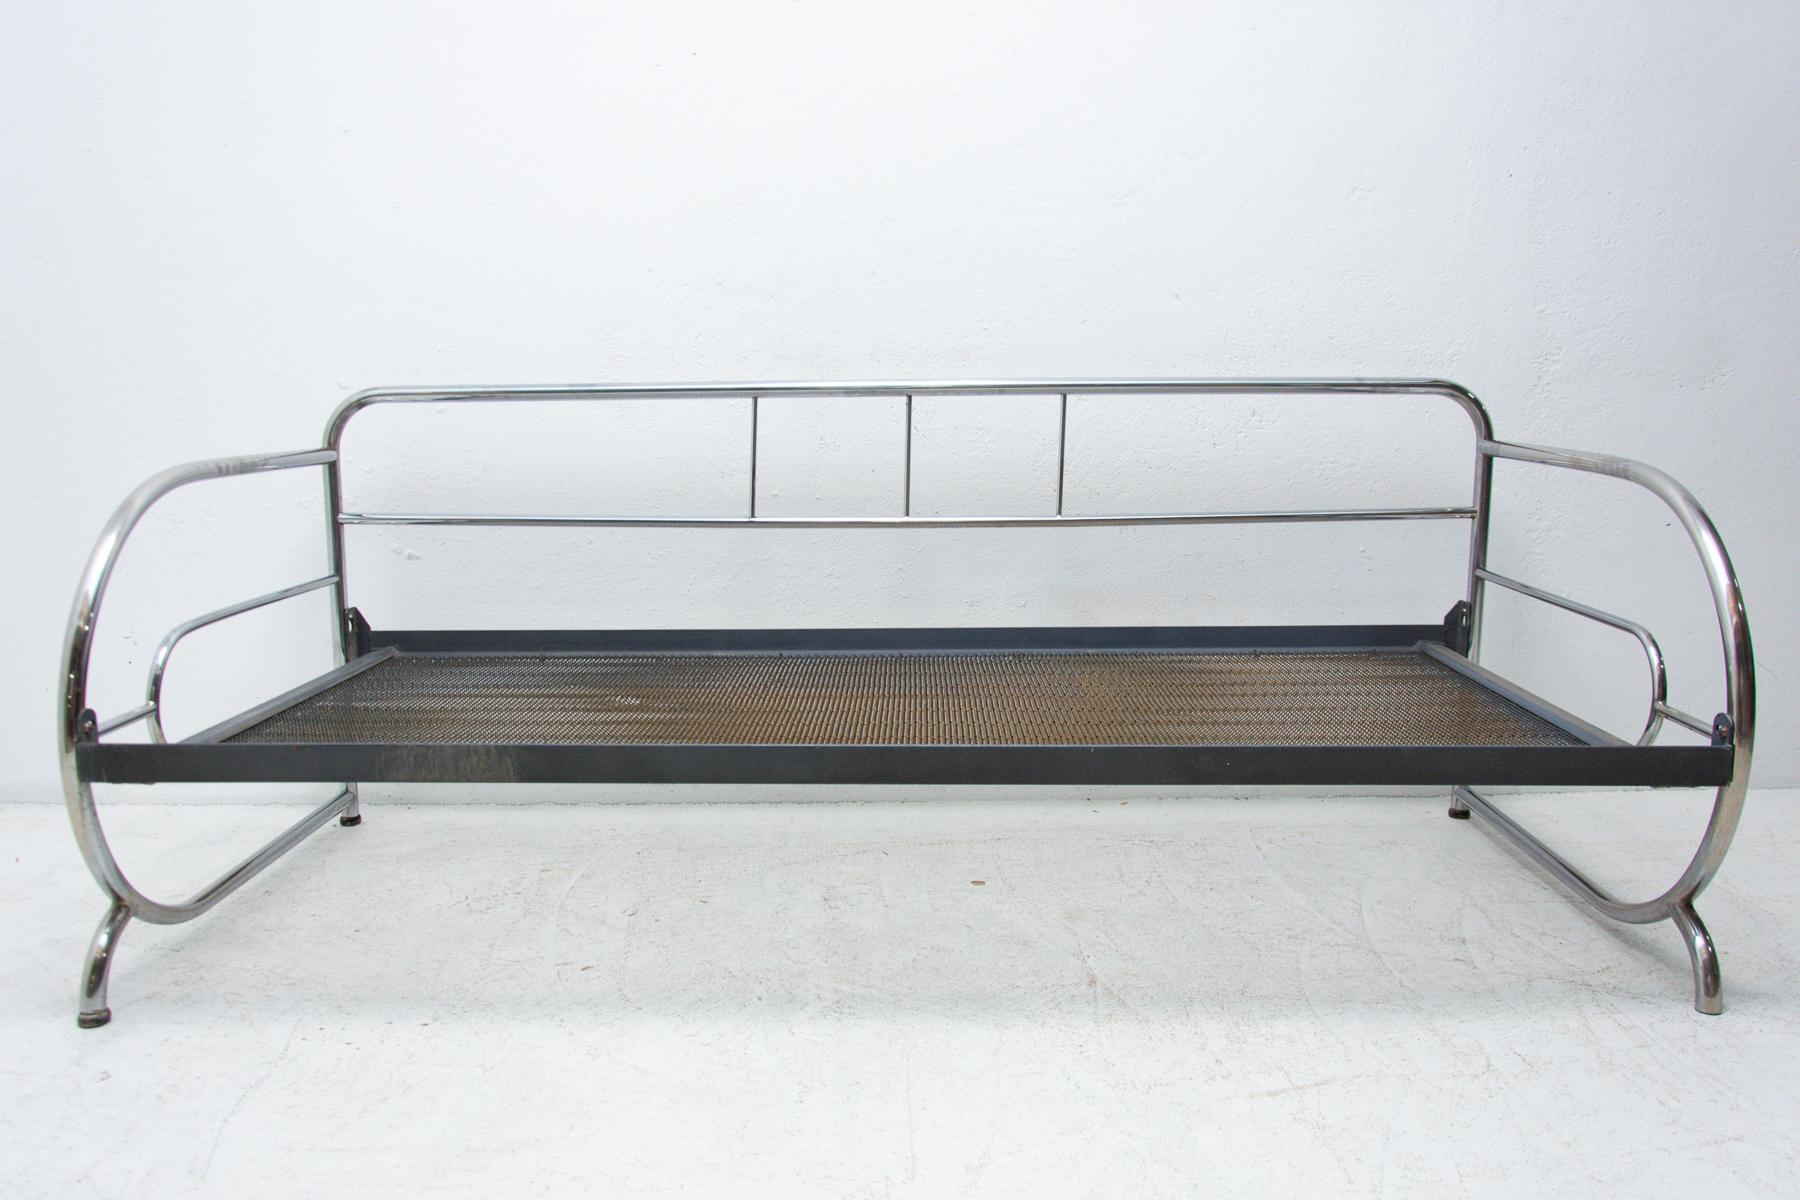 Chromed tubular steel sofa from the Bauhaus period, 1930s, Bohemia, probably produced by Hynek Gottwald. Chrome is generally in good vintage condition, shows some signs of age and use, on the left and right lower side it shows more pronounced signs